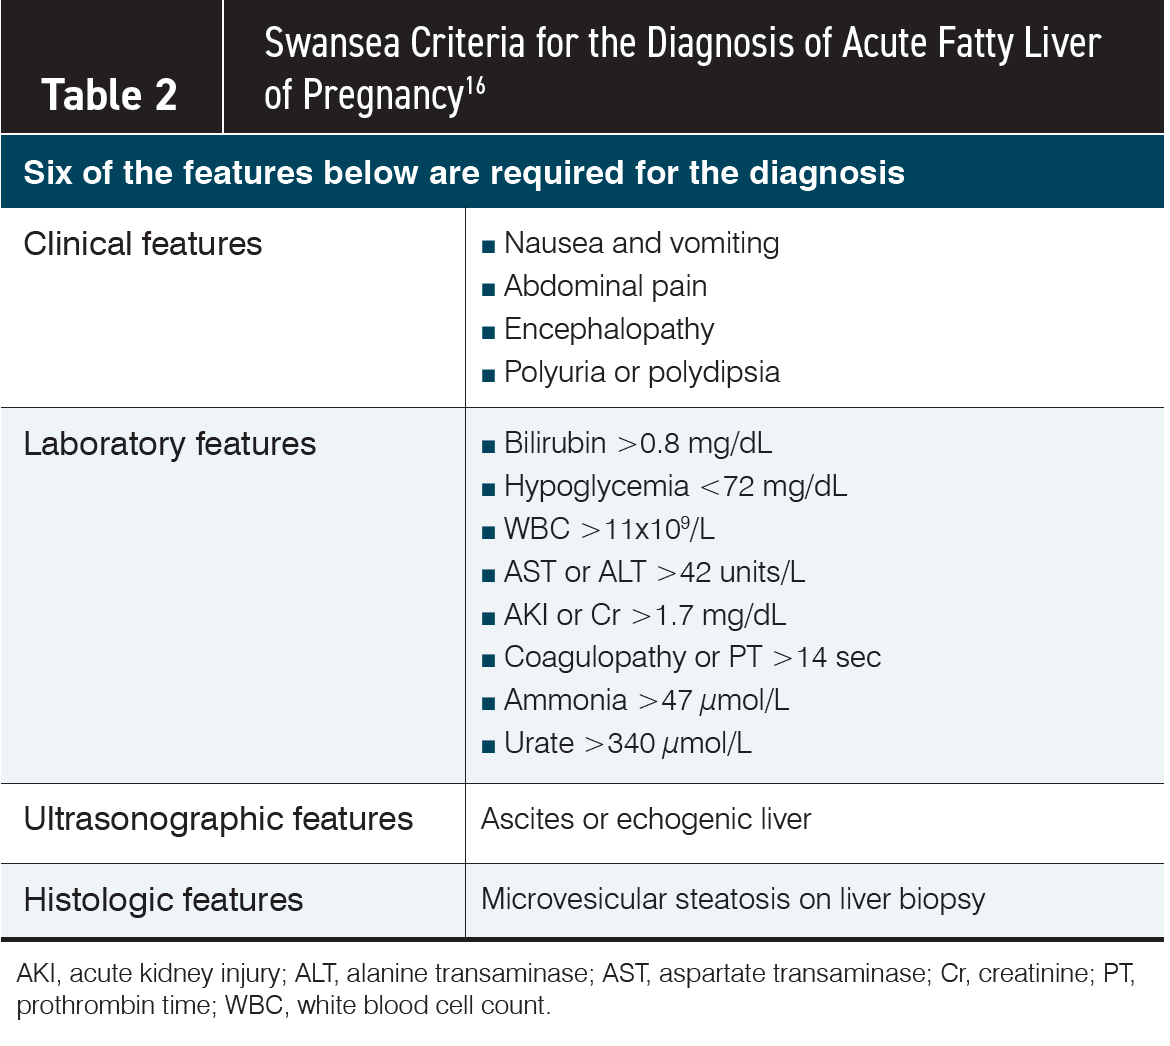 Table 2. Swansea Criteria for the Diagnosis of Acute Fatty Liver

of Pregnancy16